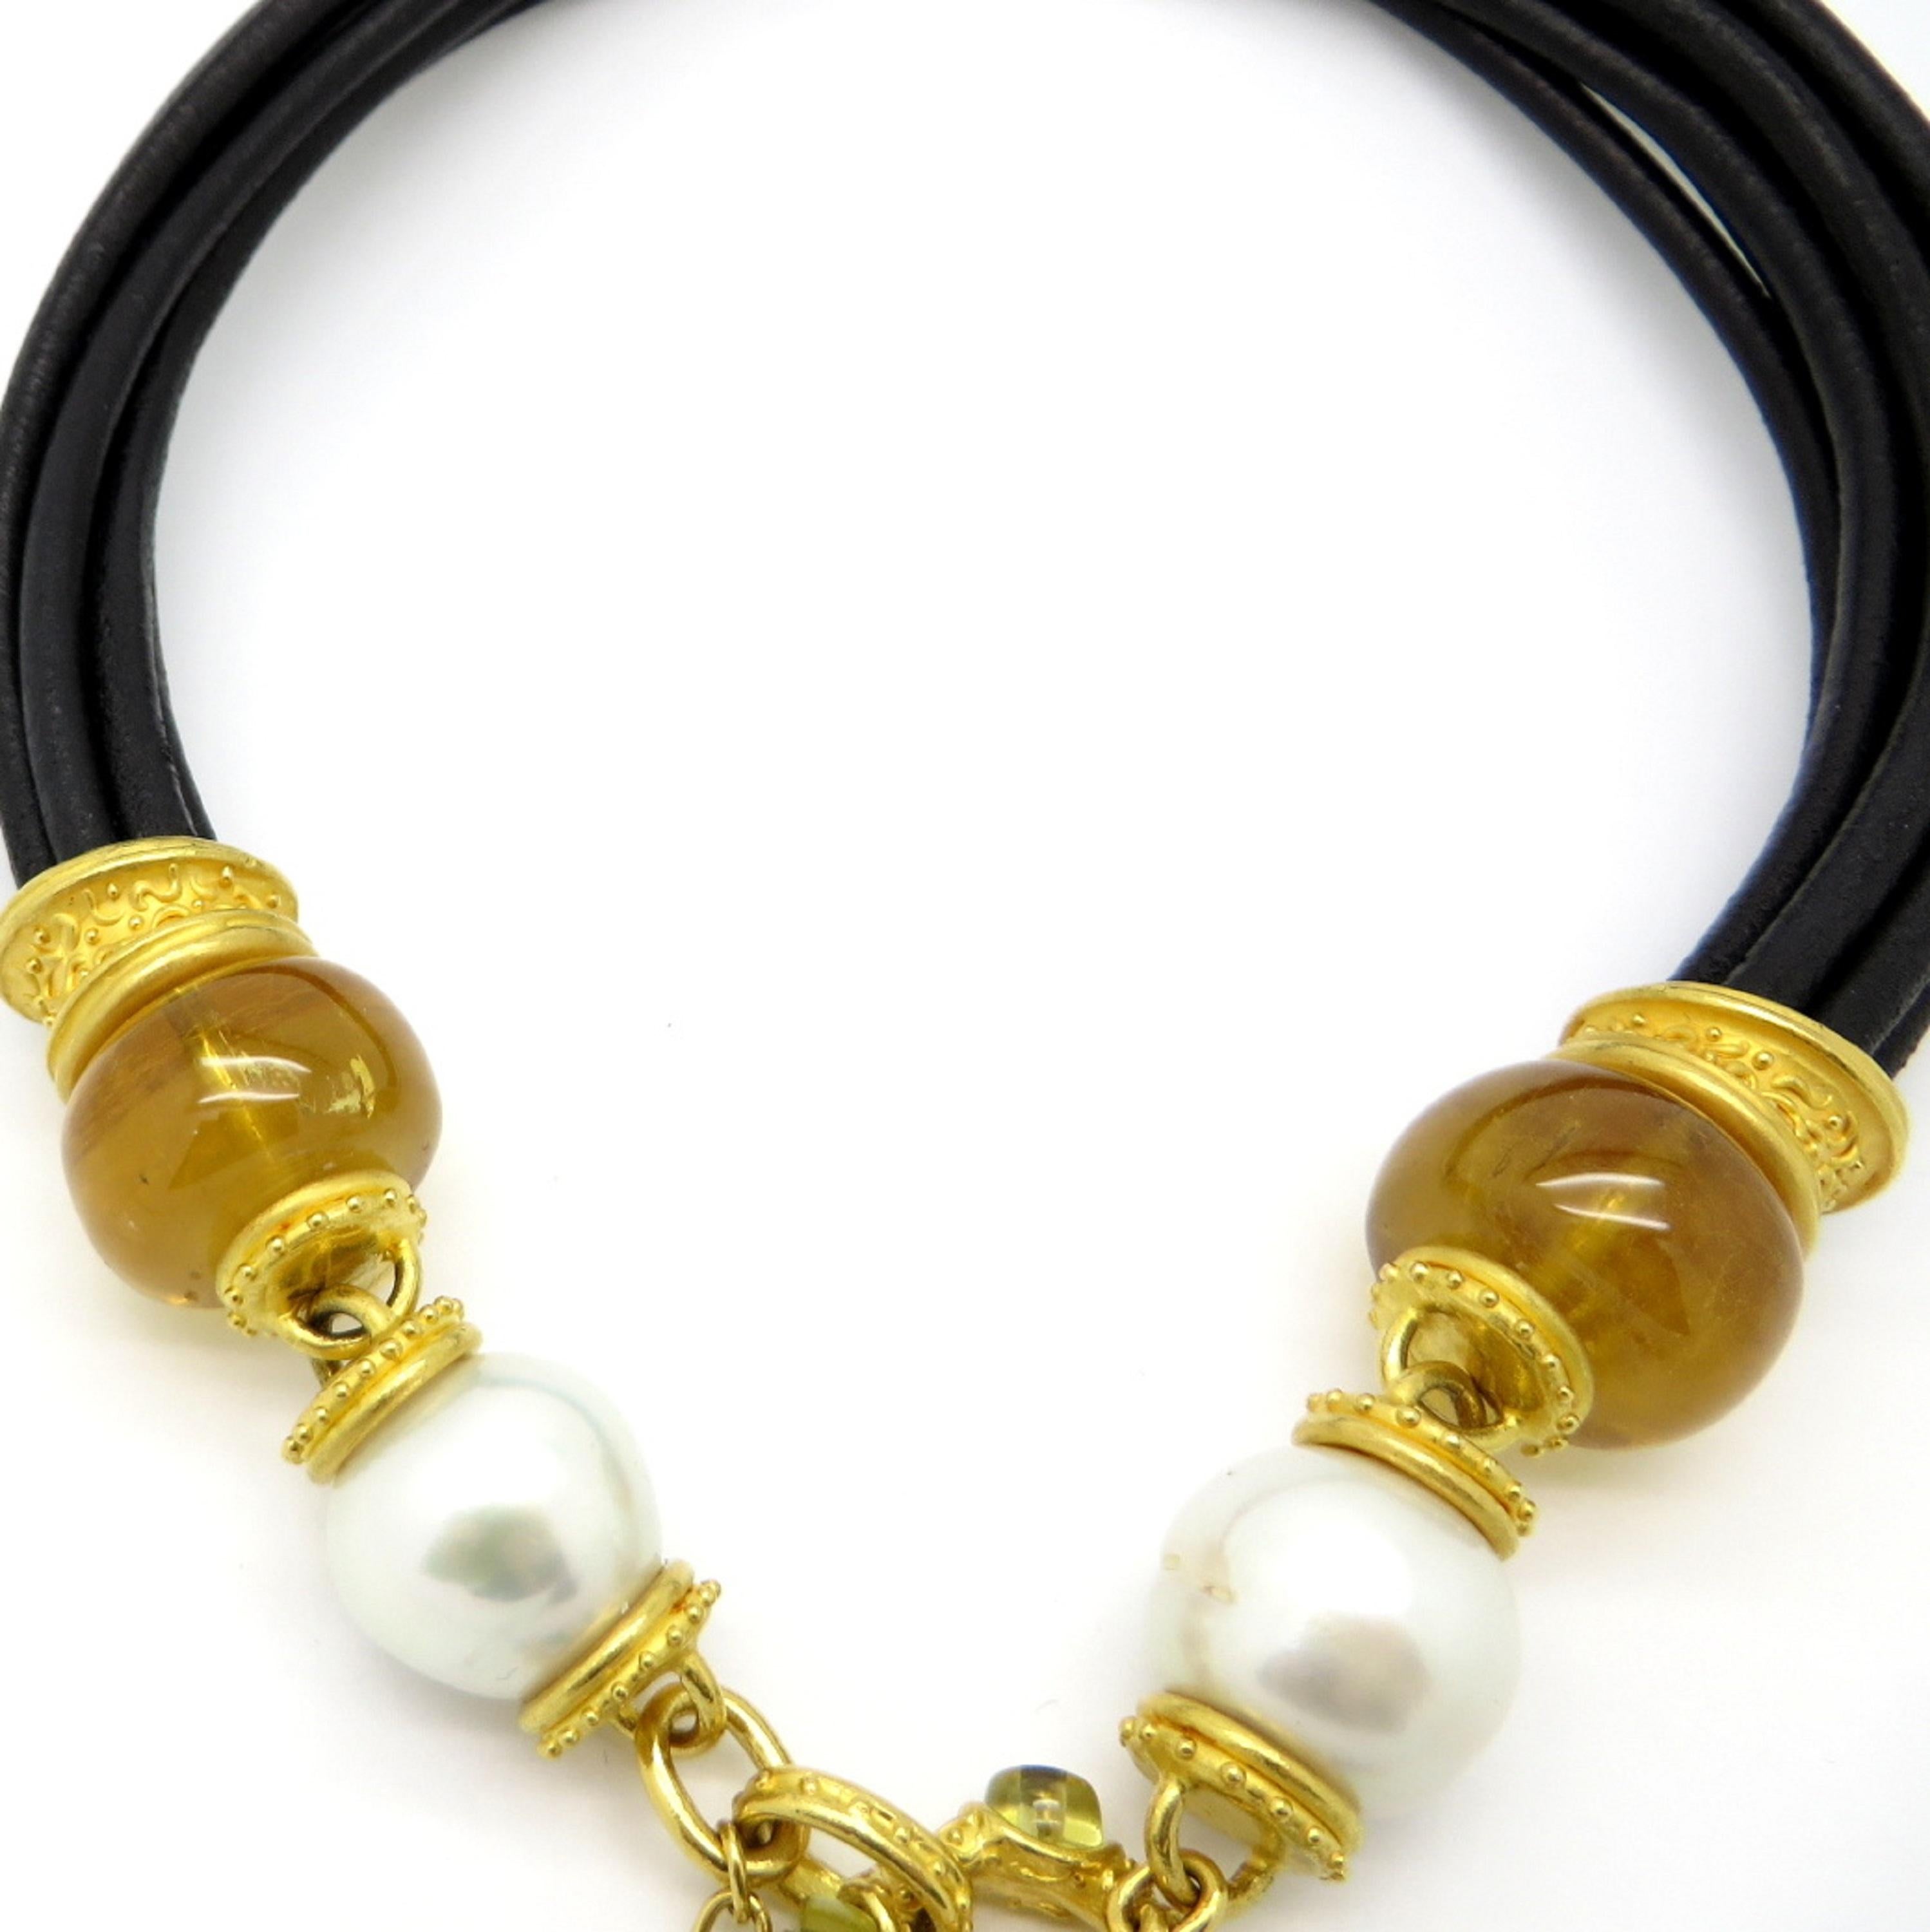 For sale is a designer Denise Roberge necklace crafted with Elephant Hair, Citrine, Pearls, and Peridot!
The necklace measures 18” inches long.  There is a small gold signature charm that is hallmarked: Denise Roberge.
Seven Elephant Hair strands